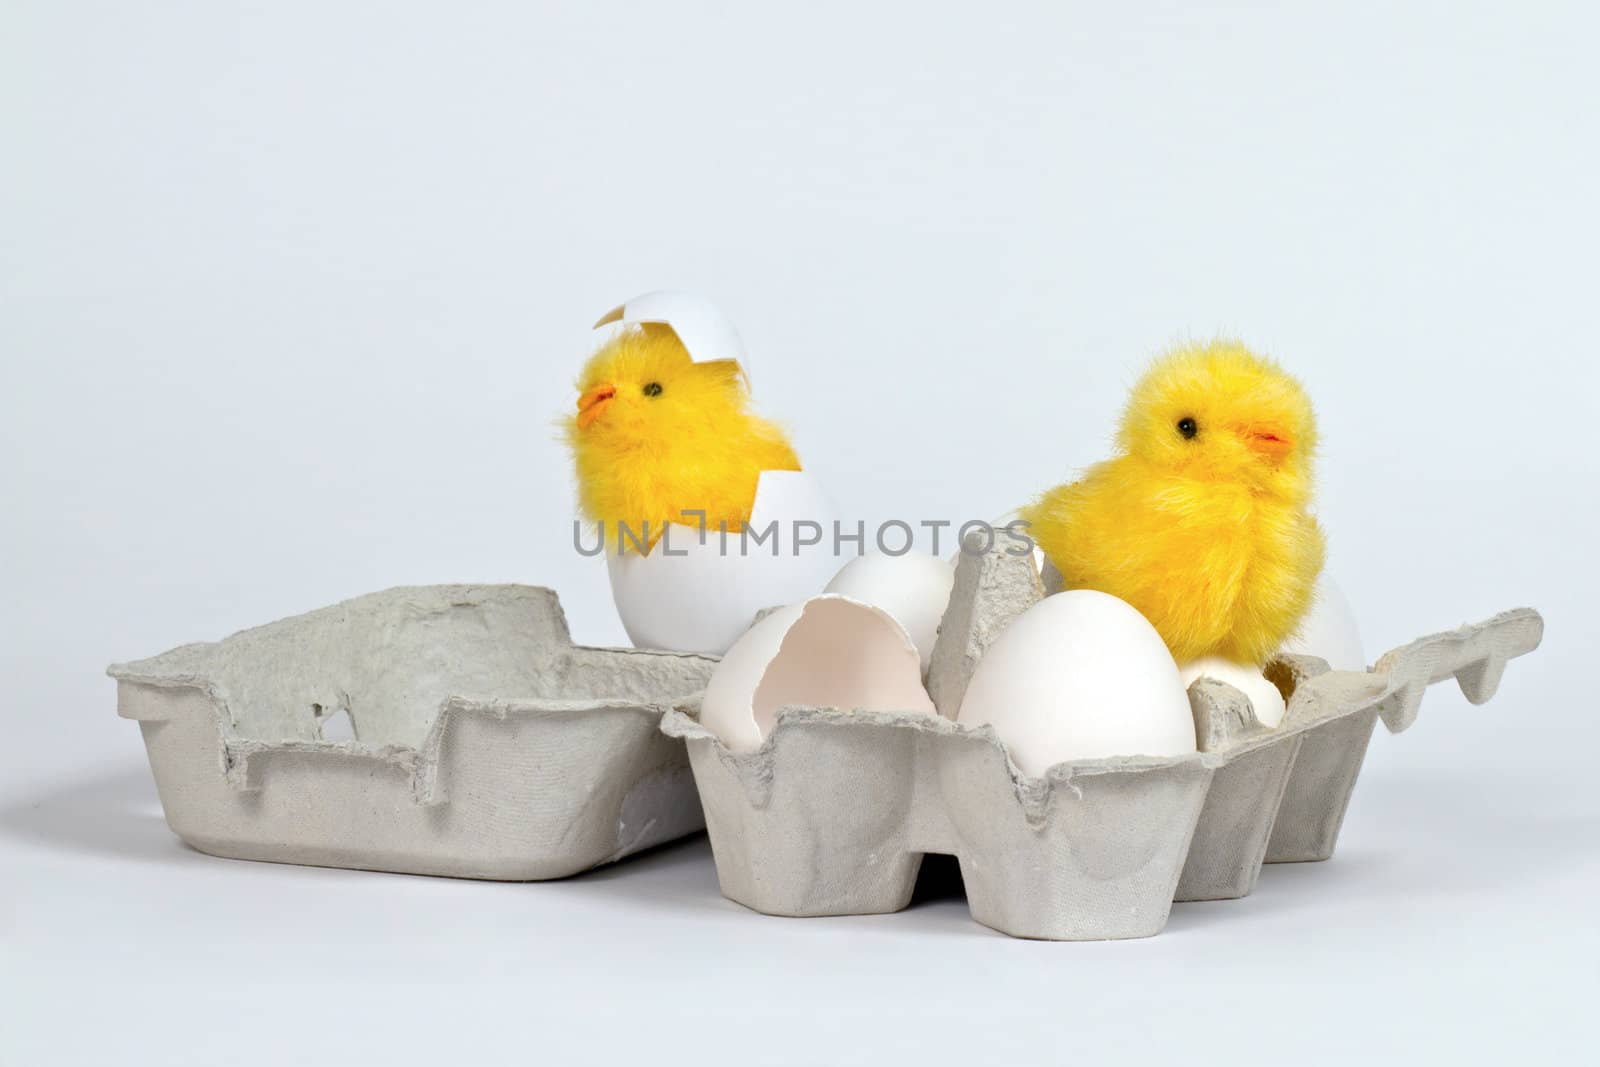 Newly hatched toy chicks in eggbox with white eggs. Hi-key